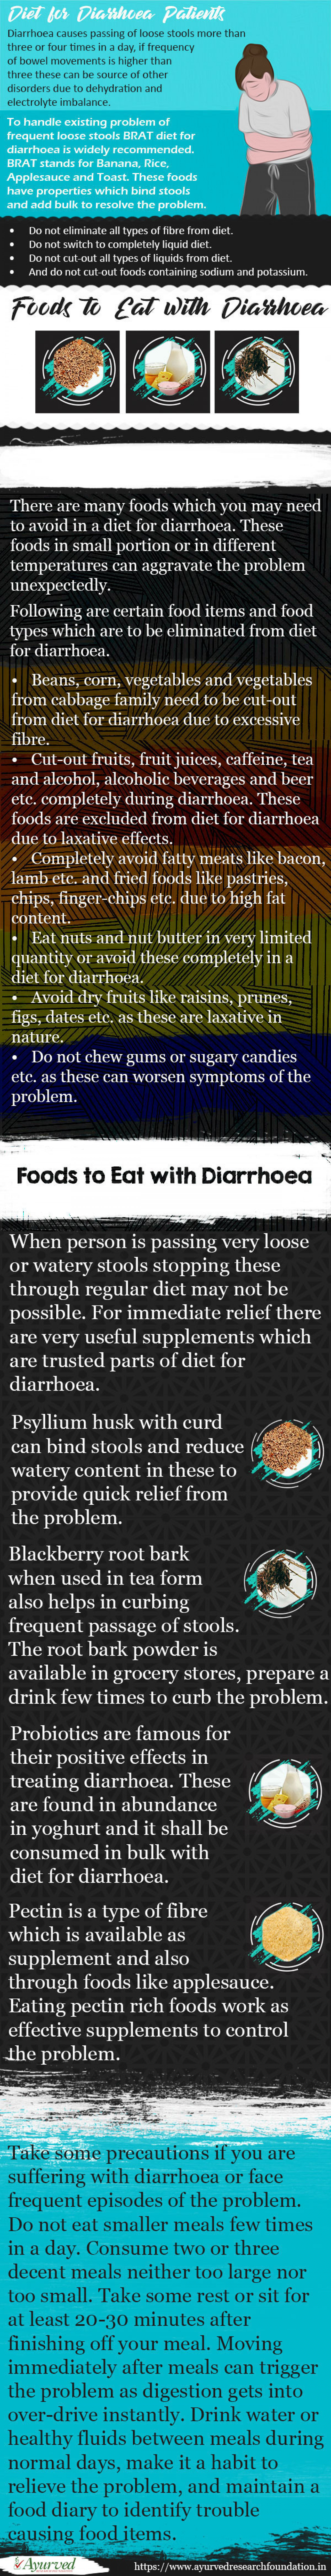 Best Diet for Diarrhoea Patients Infographic, Foods to Eat With Diarrhea Infographic